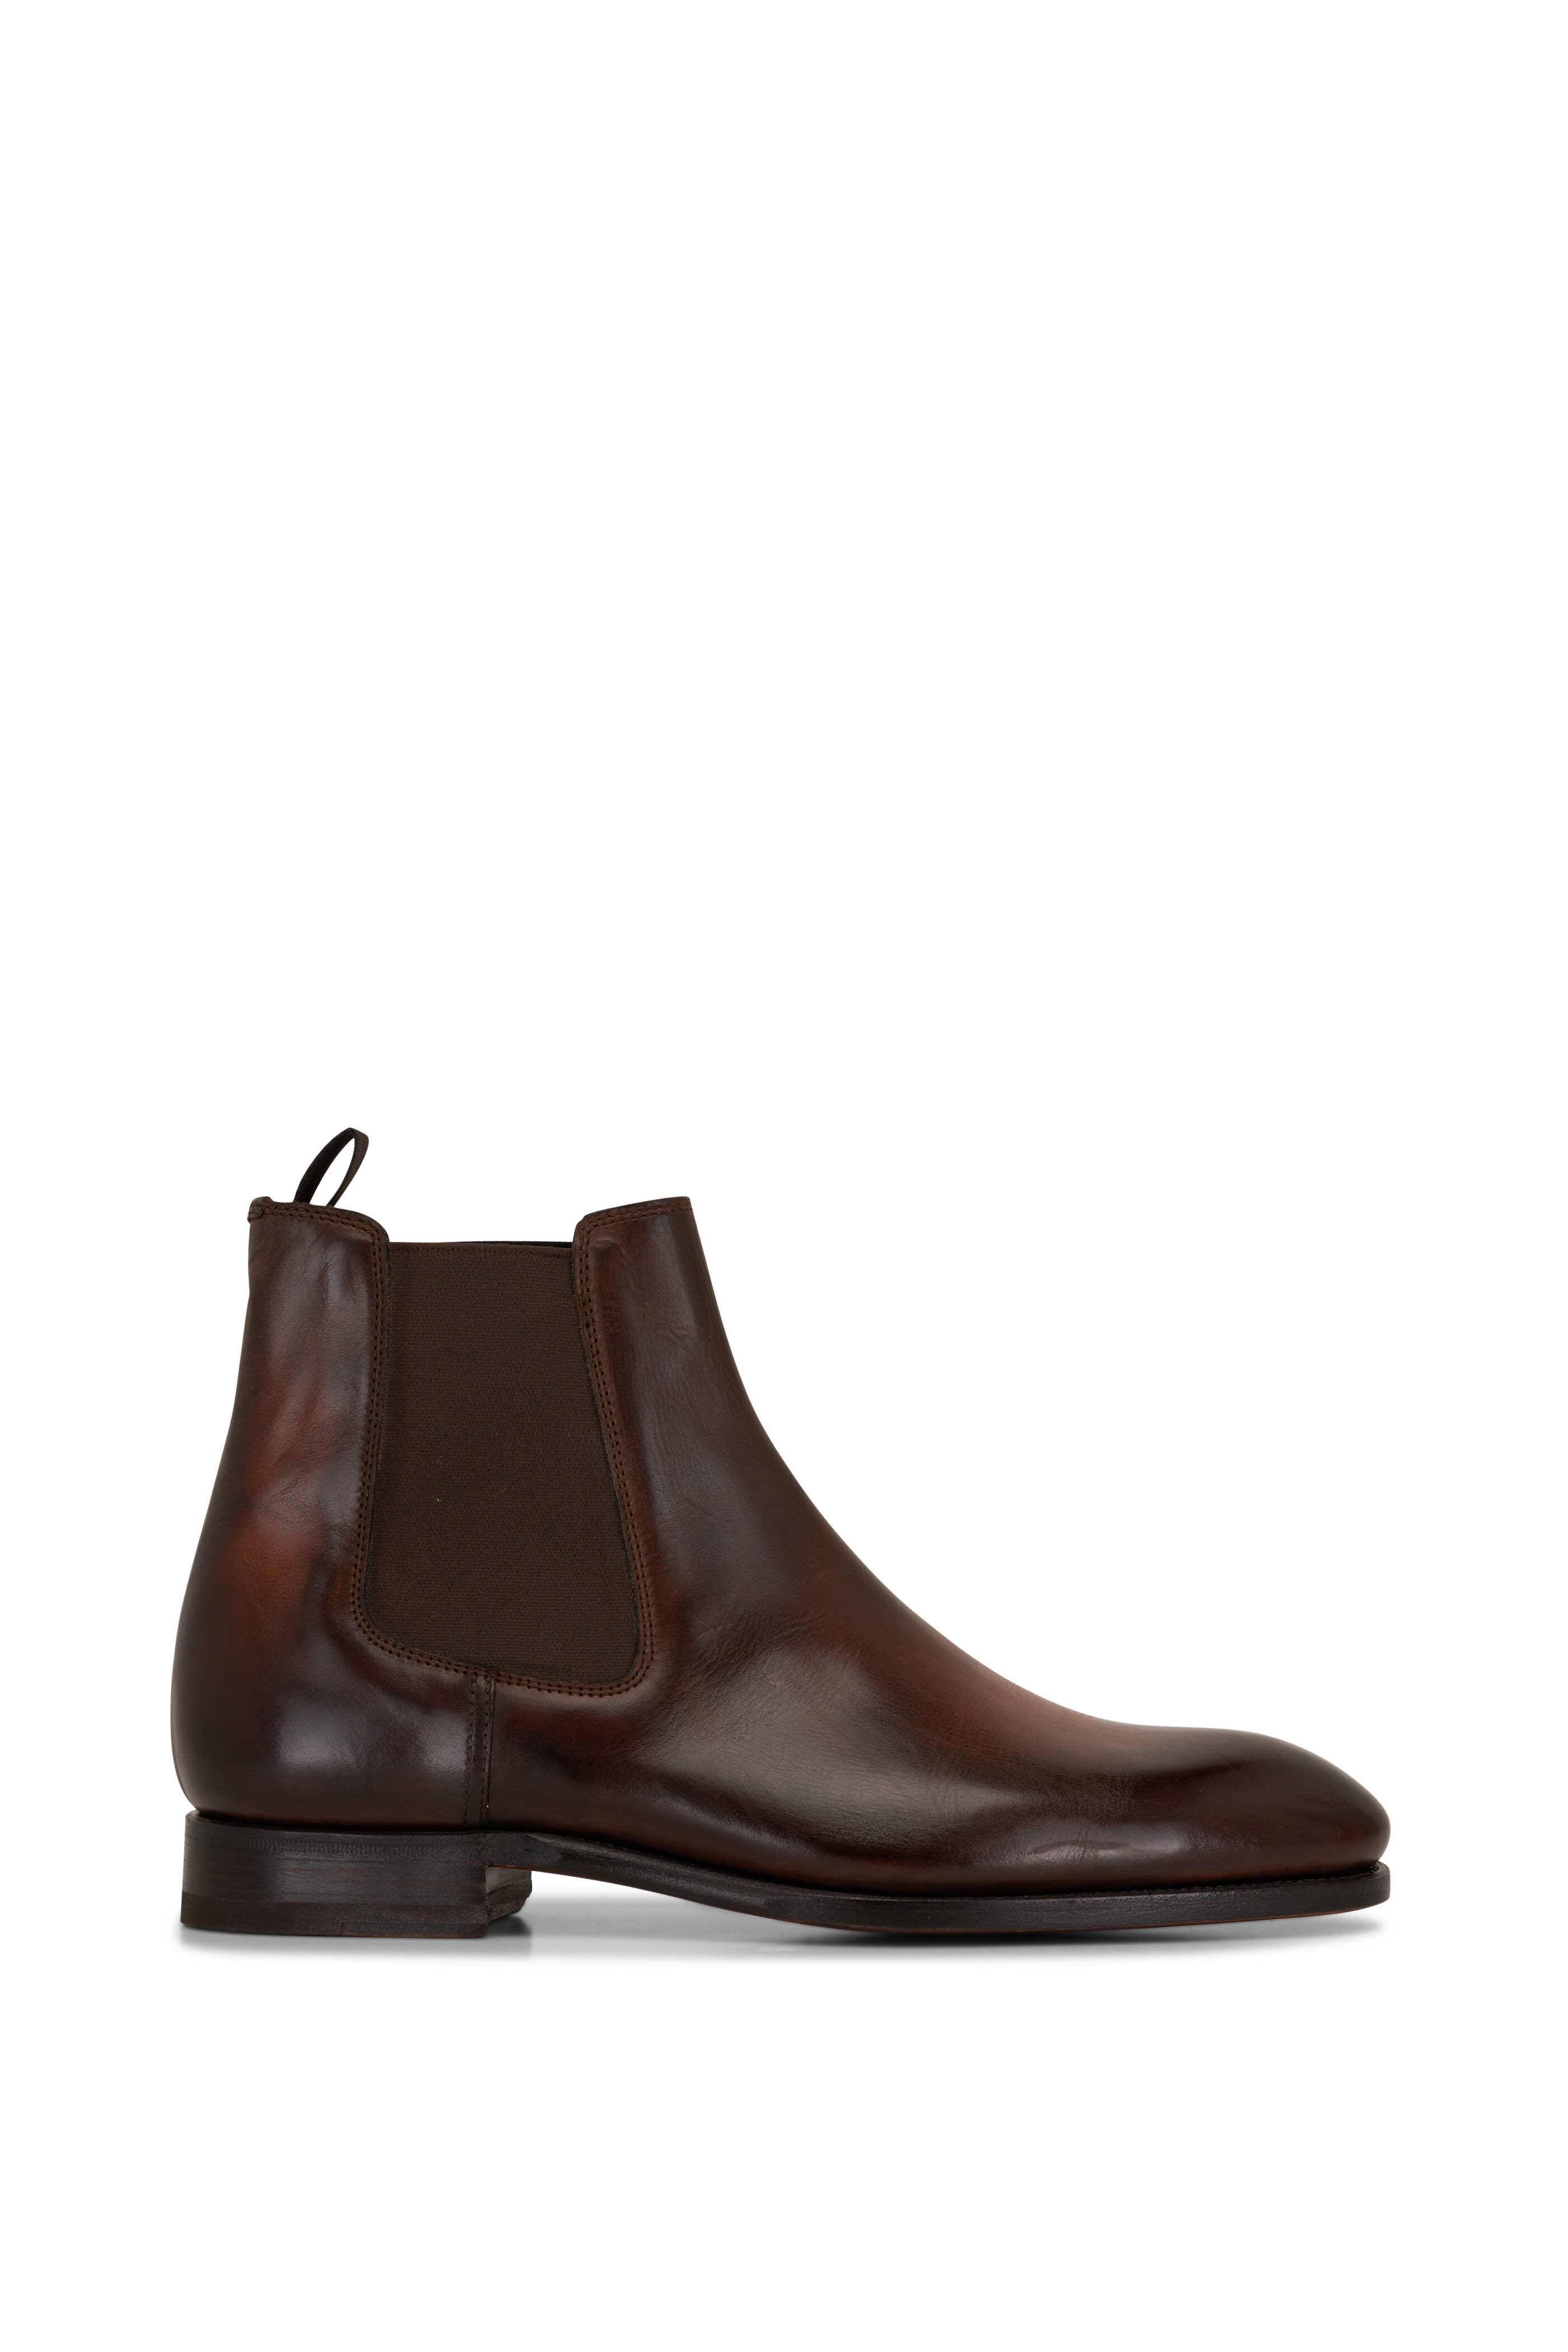 Bontoni - Cavaliere Brown Leather Chelsea Boot | Mitchell Stores